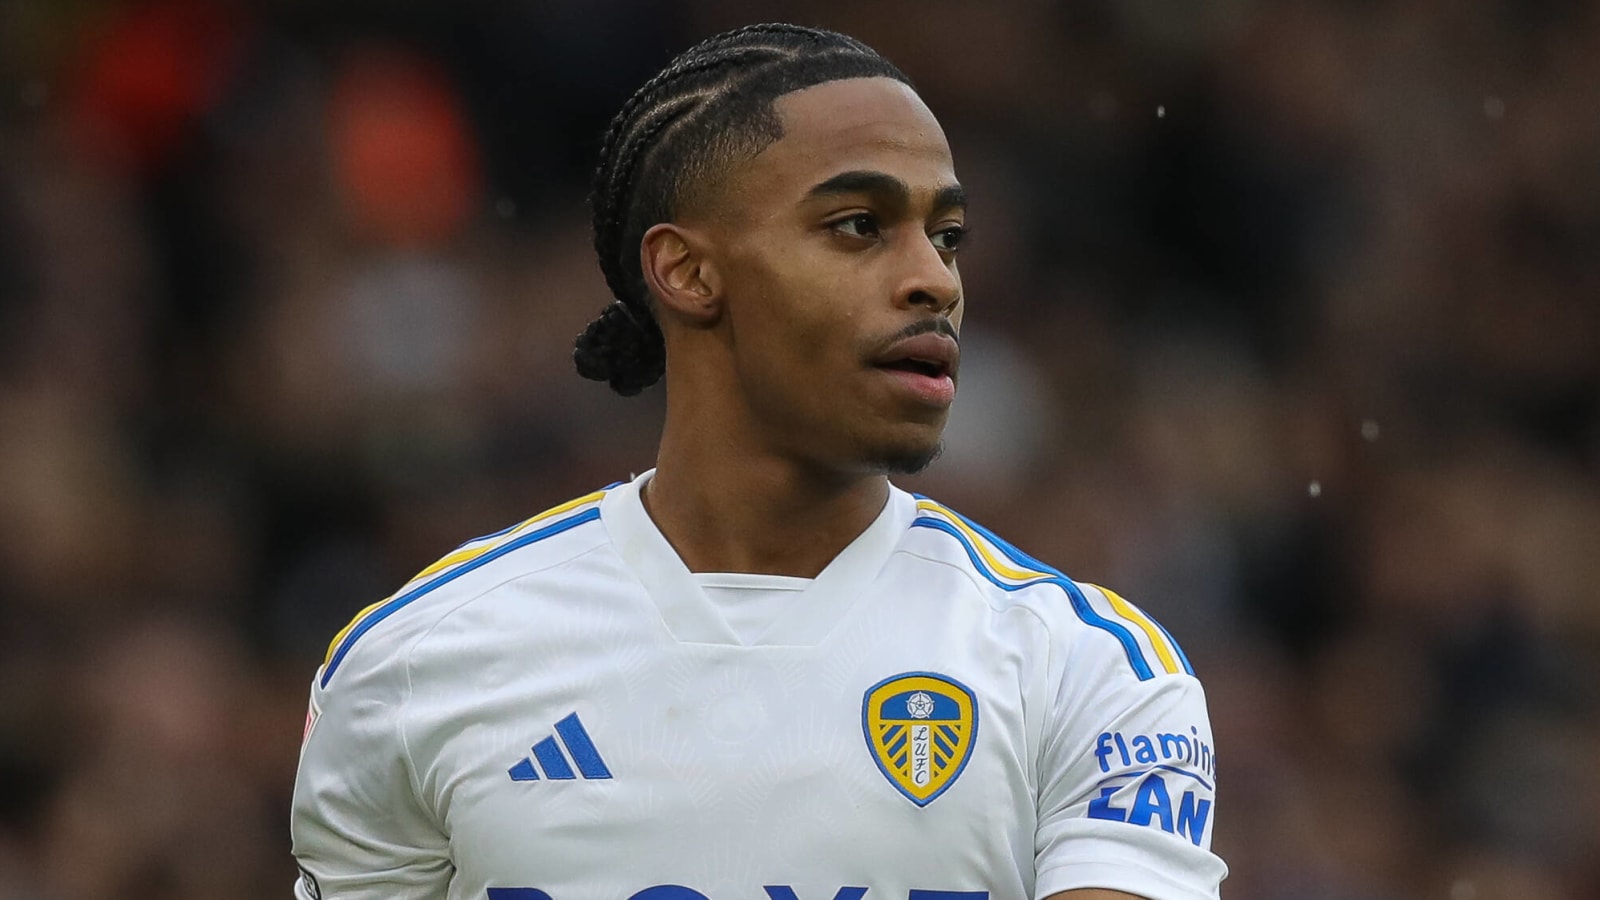 Manager claims Leeds player is very bad in team training